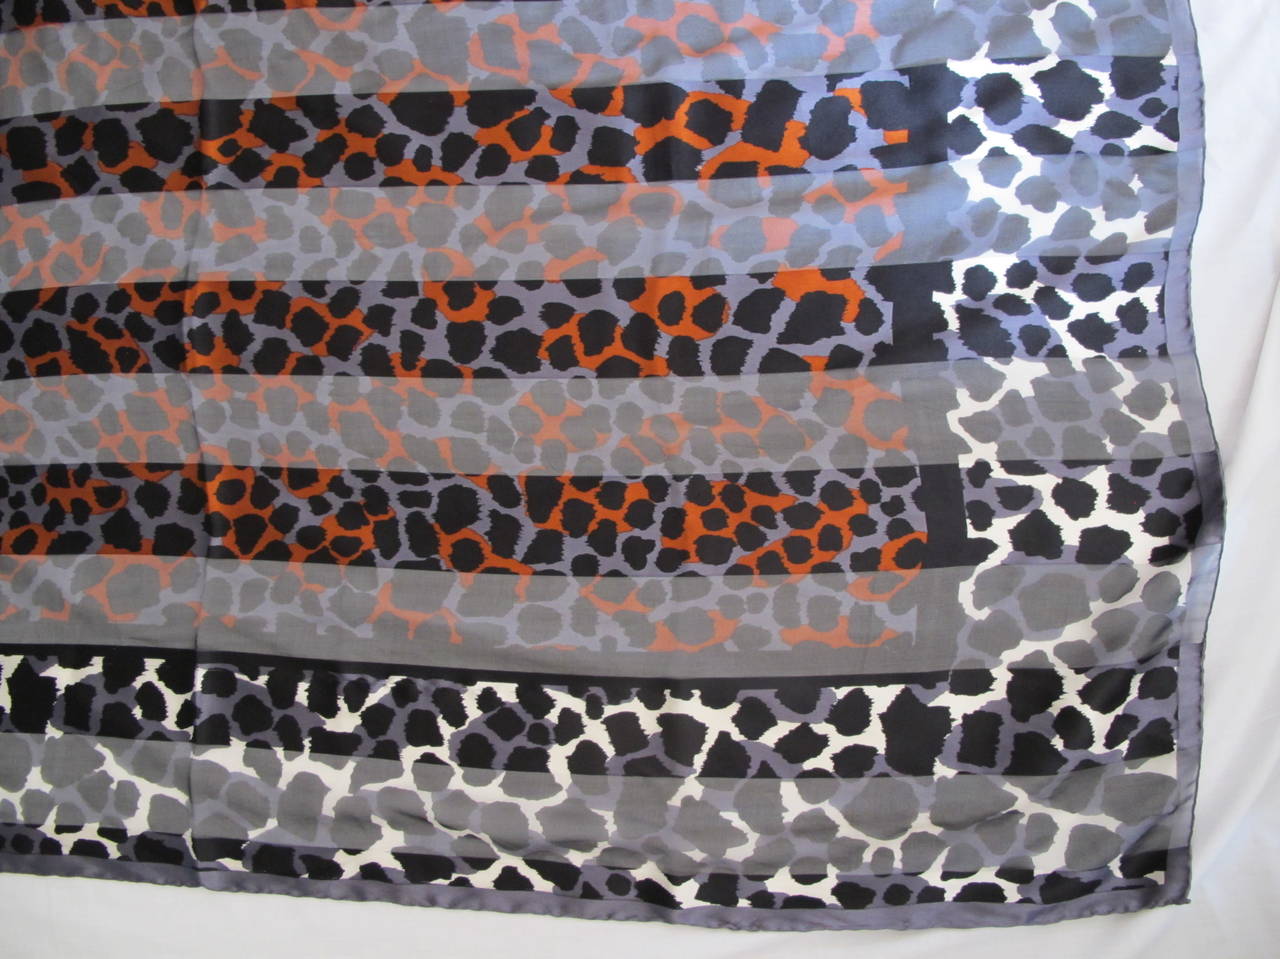 Luxurious oversized leopard designed silk scarf-shawl. Colors include vicuna, black, grey and white and is hand-rolled. Also can be used as a pareo.